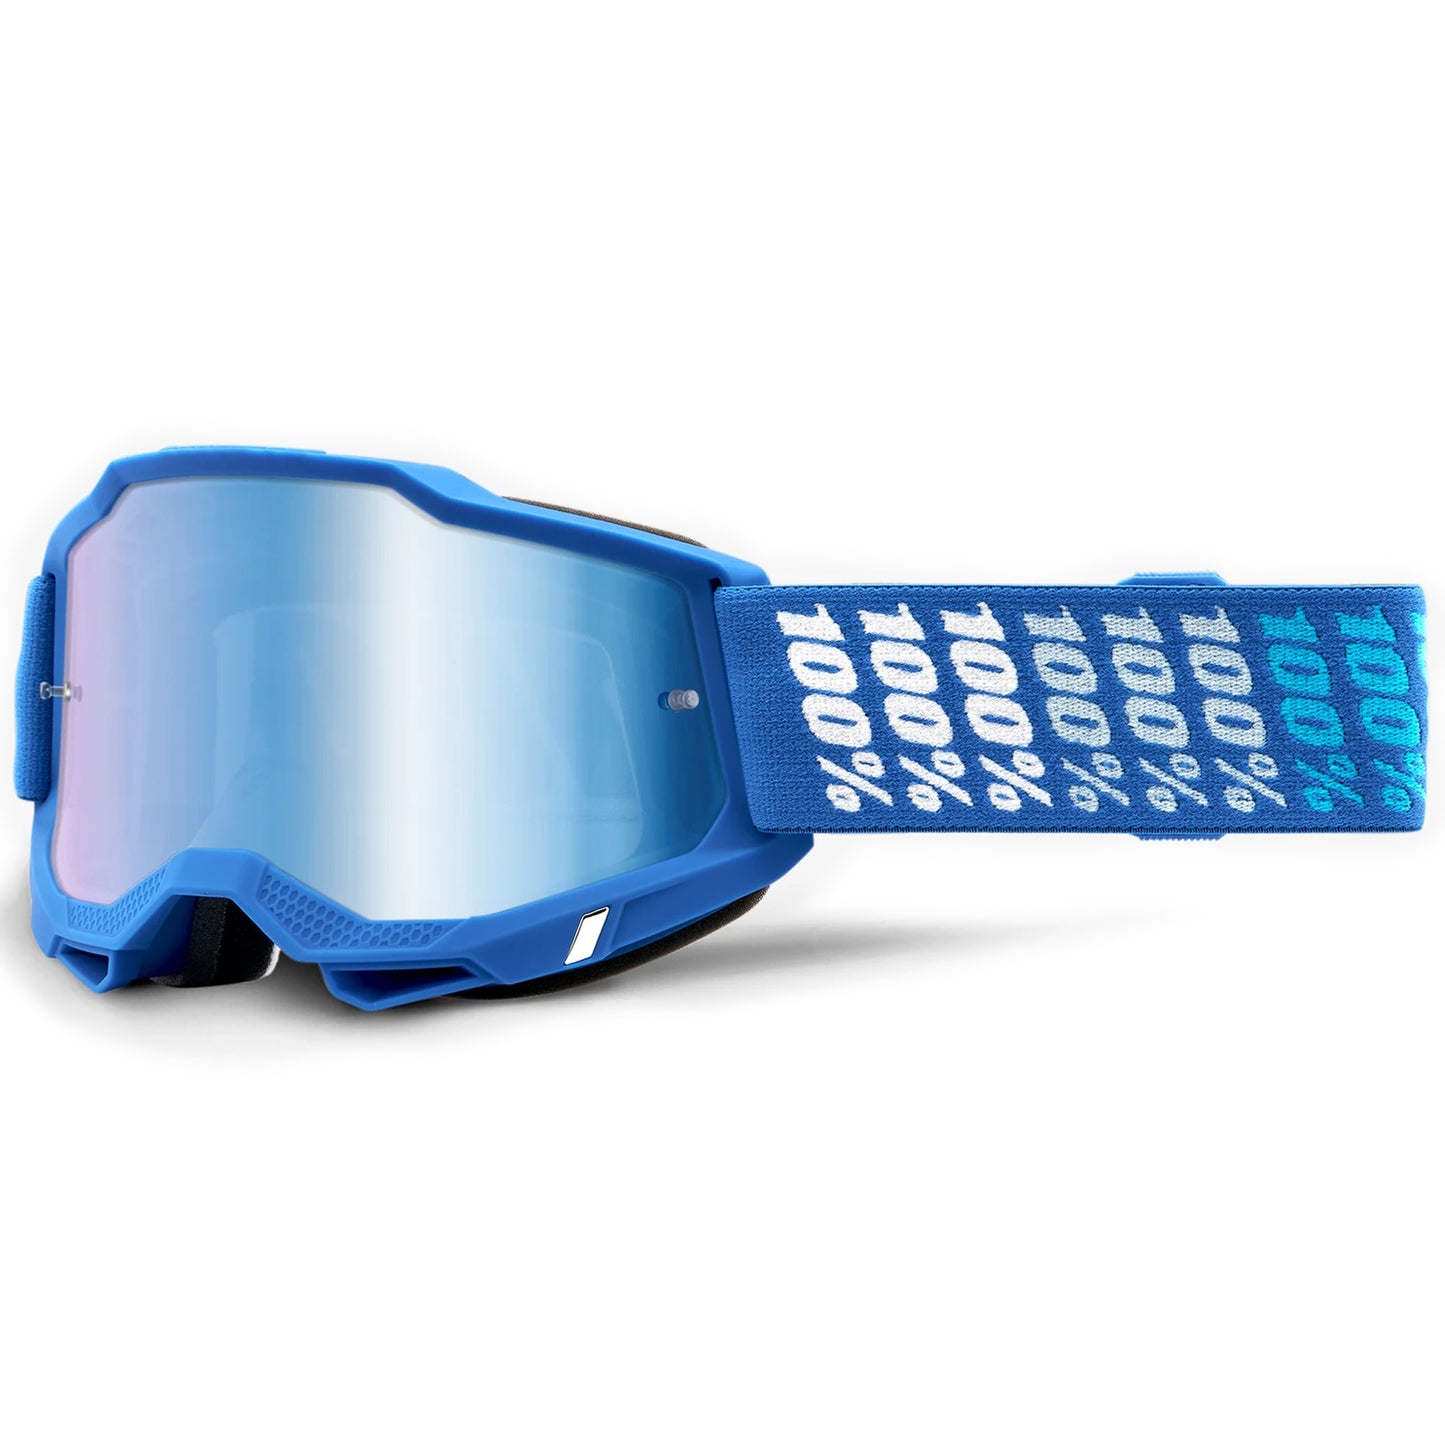 100% Accuri 2 Goggles - Yarger (Mirror Blue Lens)